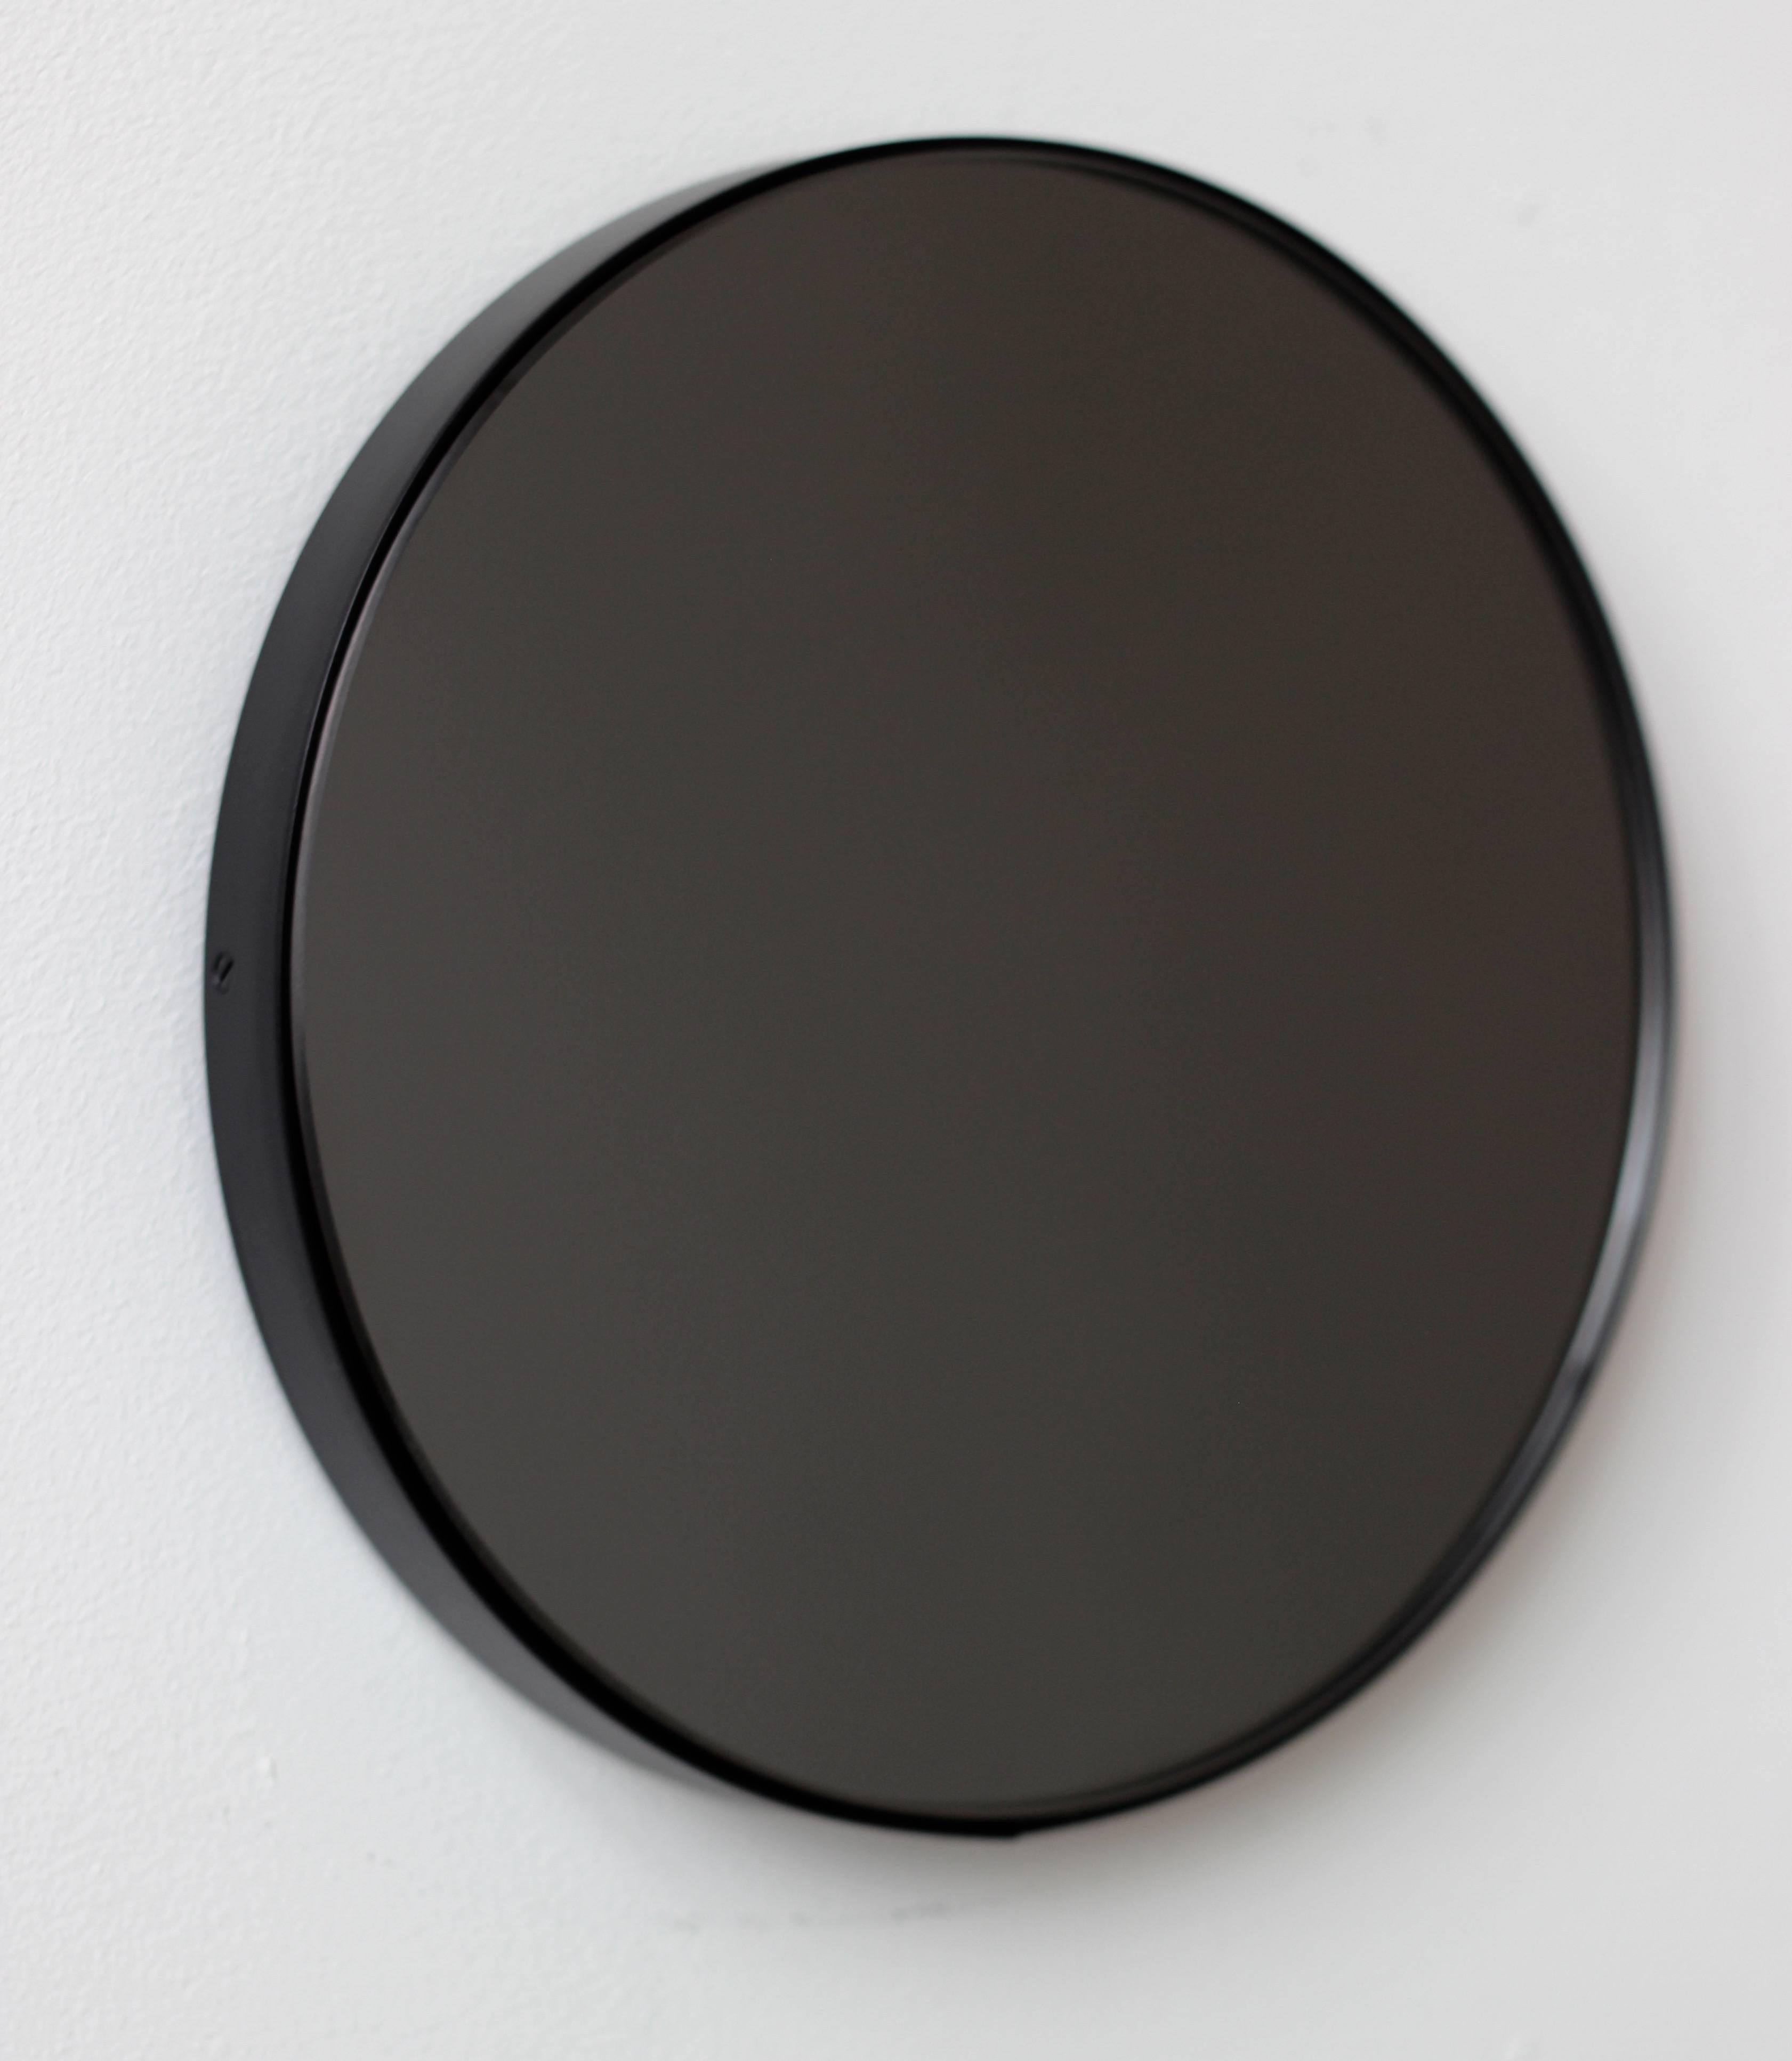 Poudré Orbis Black Tinted Round Minimalist Mirror with Black Frame, Customisable, Small en vente